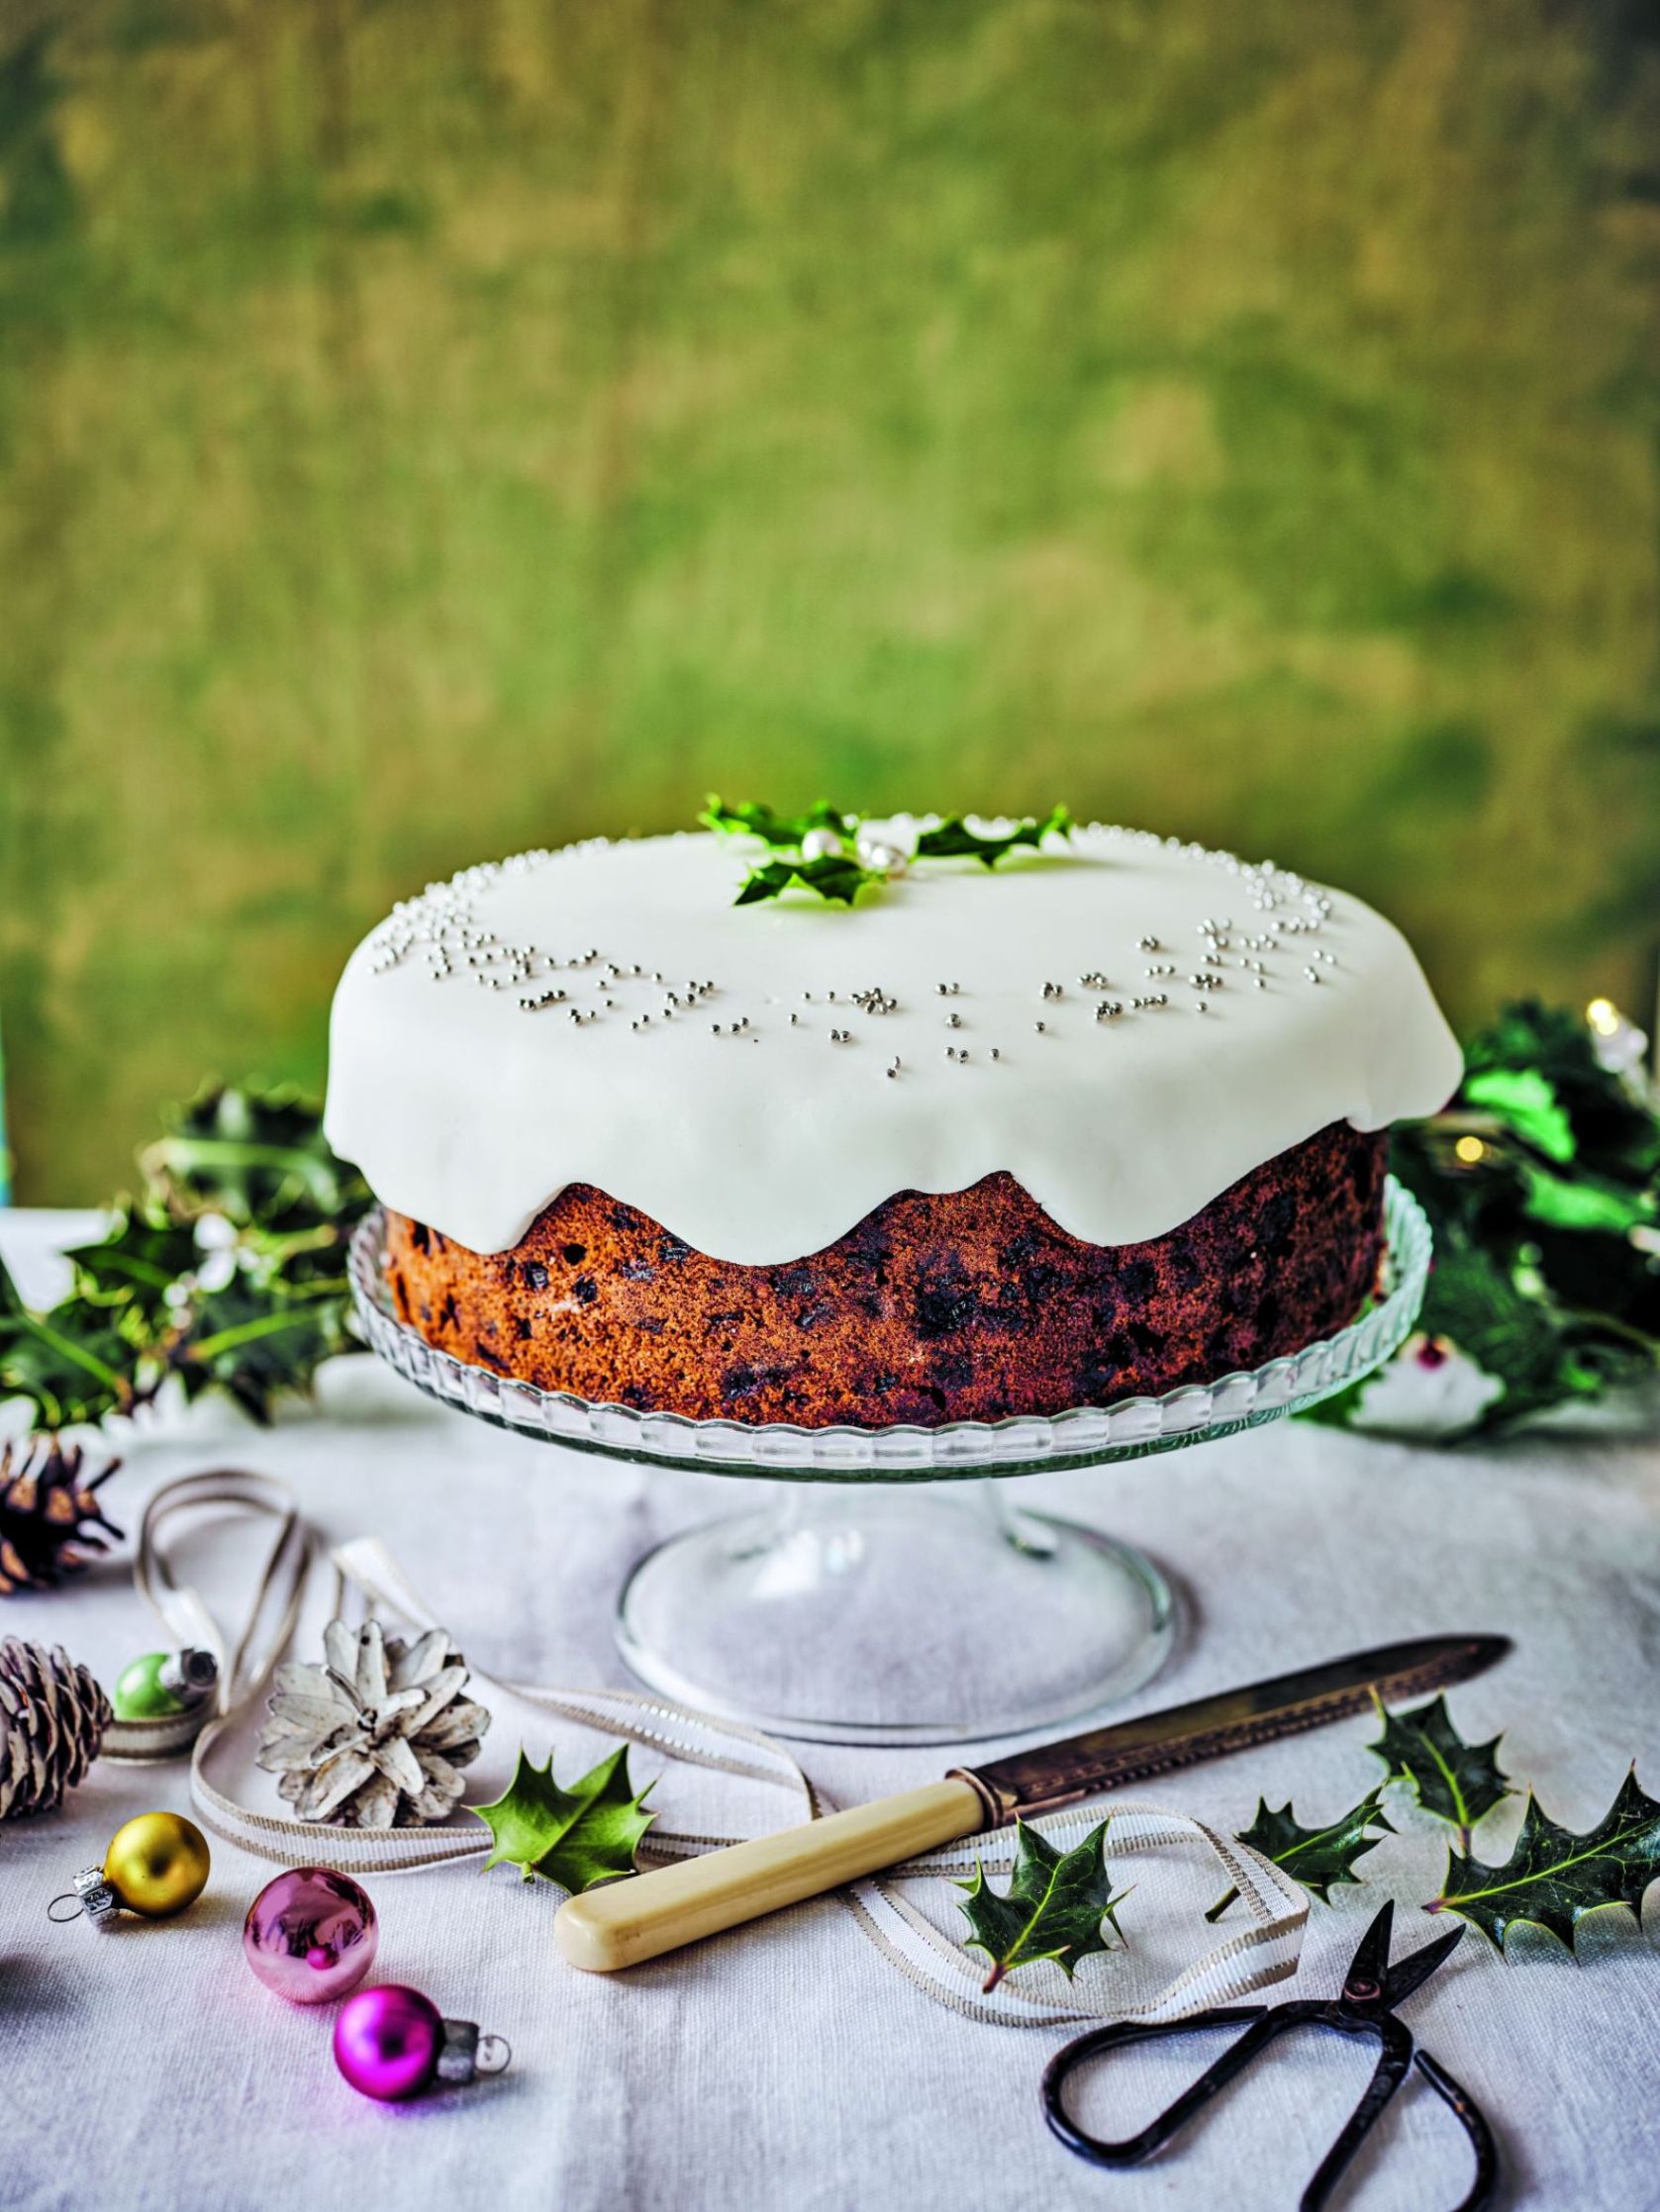 Christmas Cake Recipe cooked by Chef Ajay Chopra